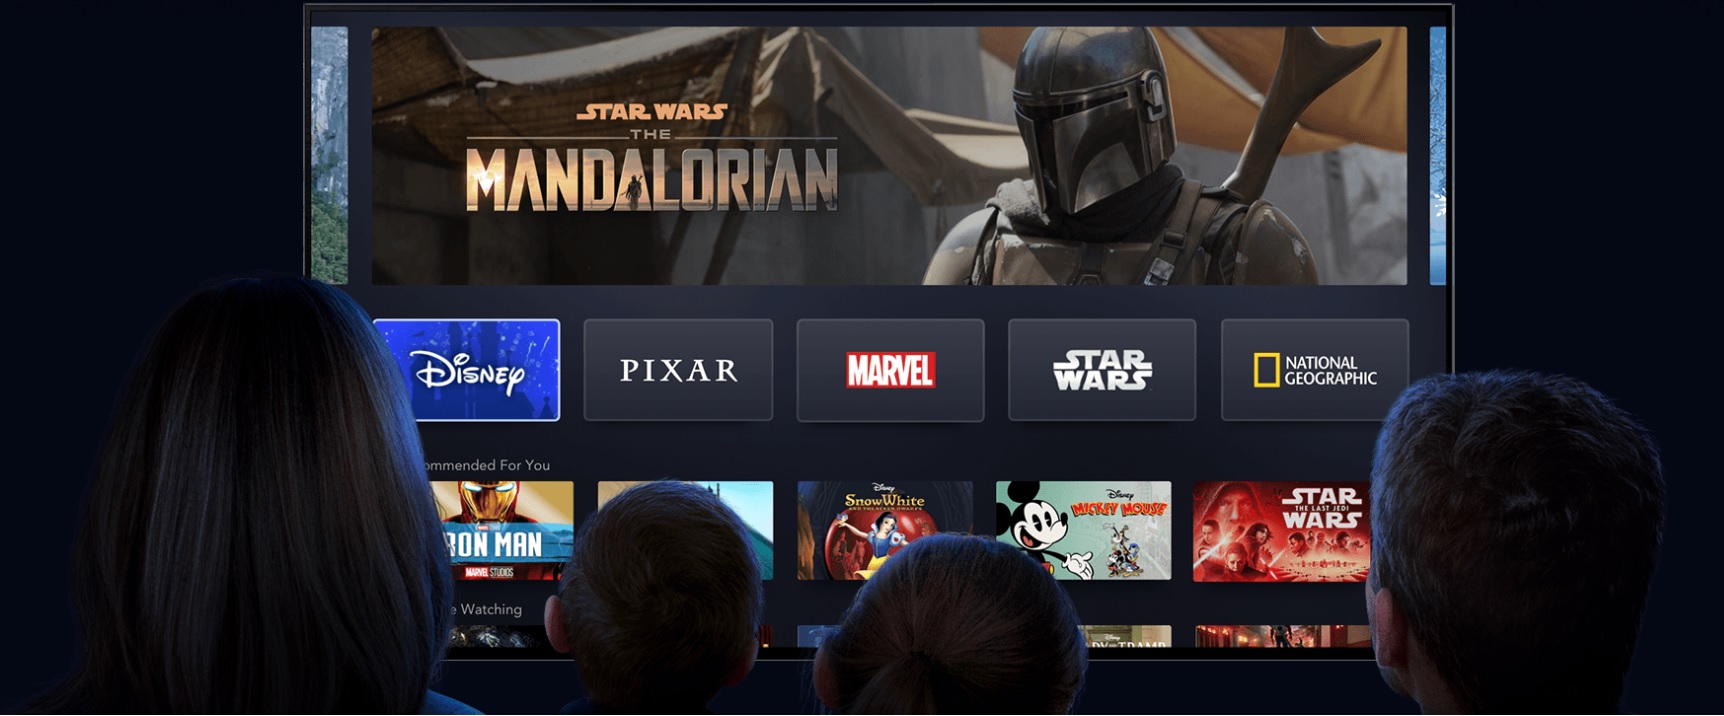 image of family watching disney+ with star wars the mandalorian on screen